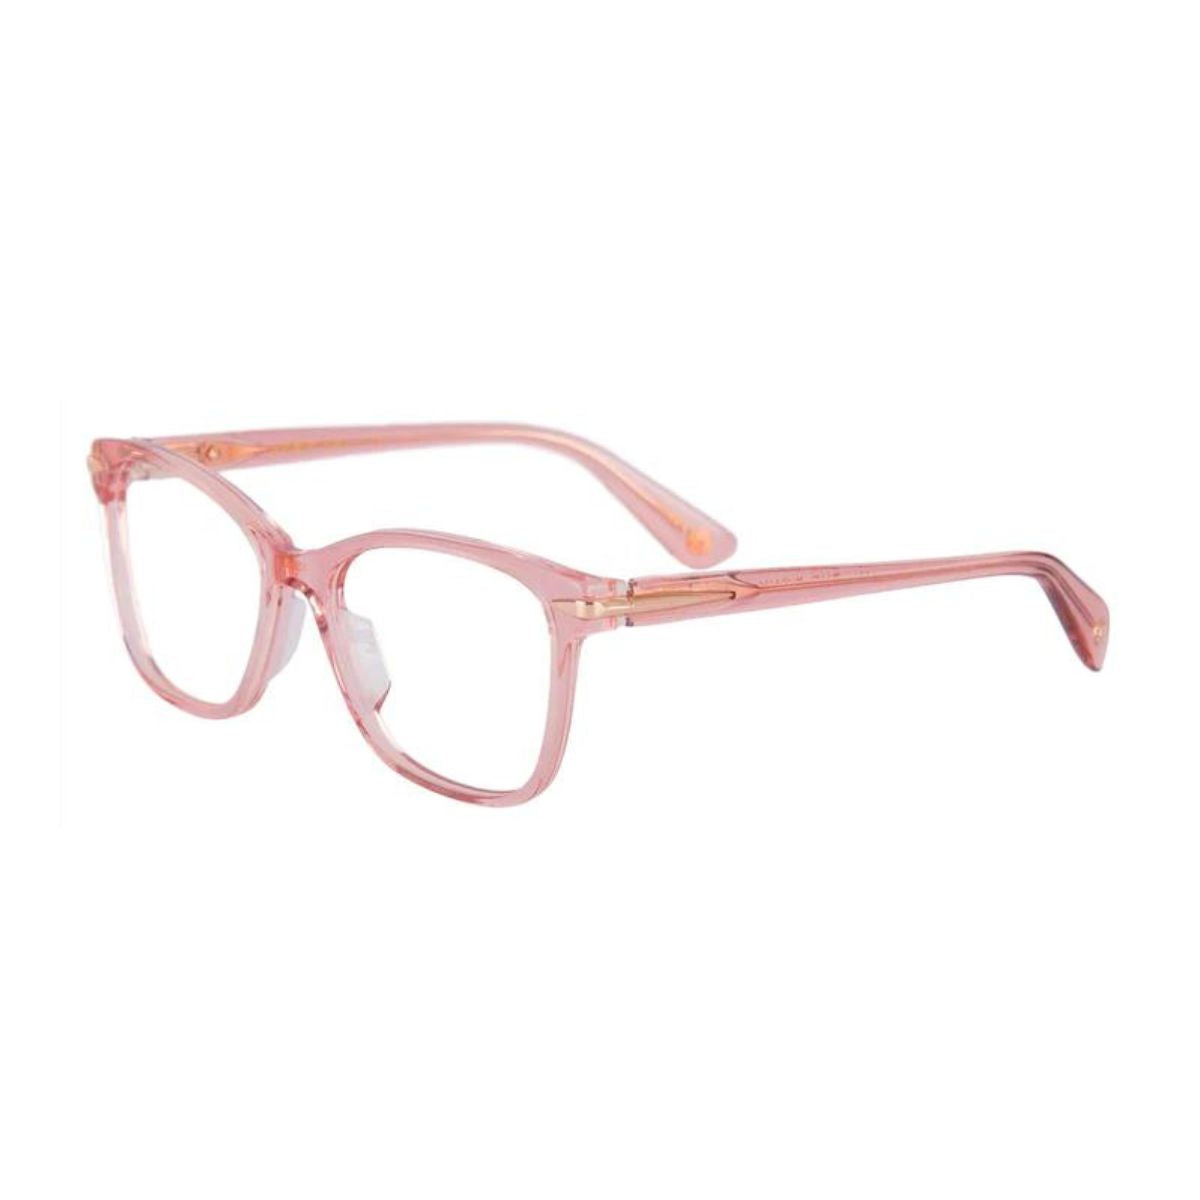 "The Monk Florence C4 optical frame for women's online at optorium"